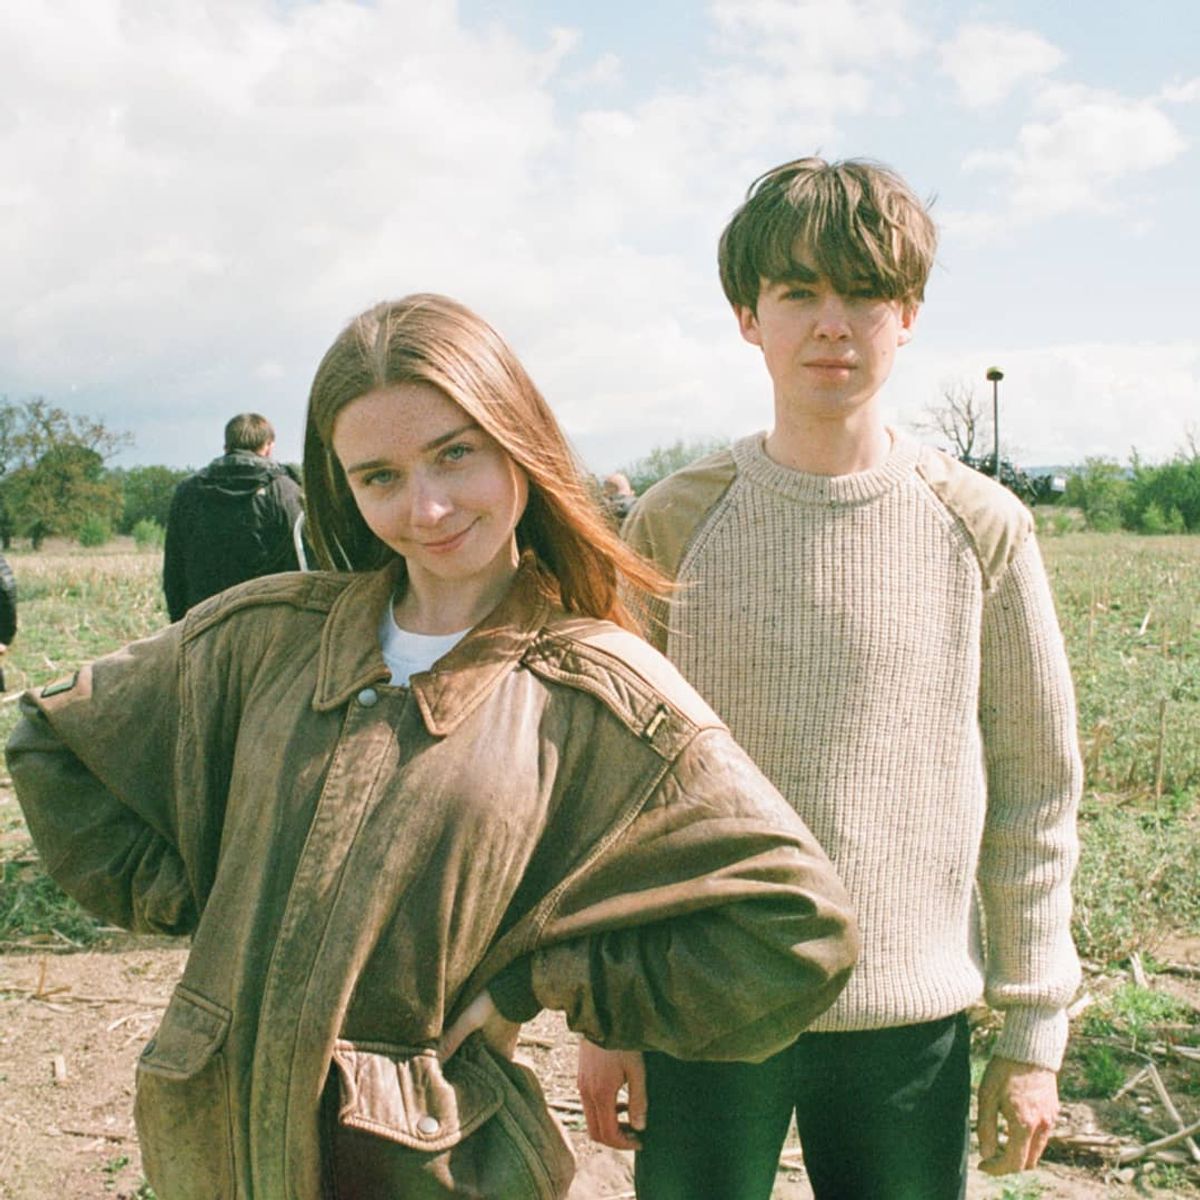 A Review On 'The End of the F***ing World'